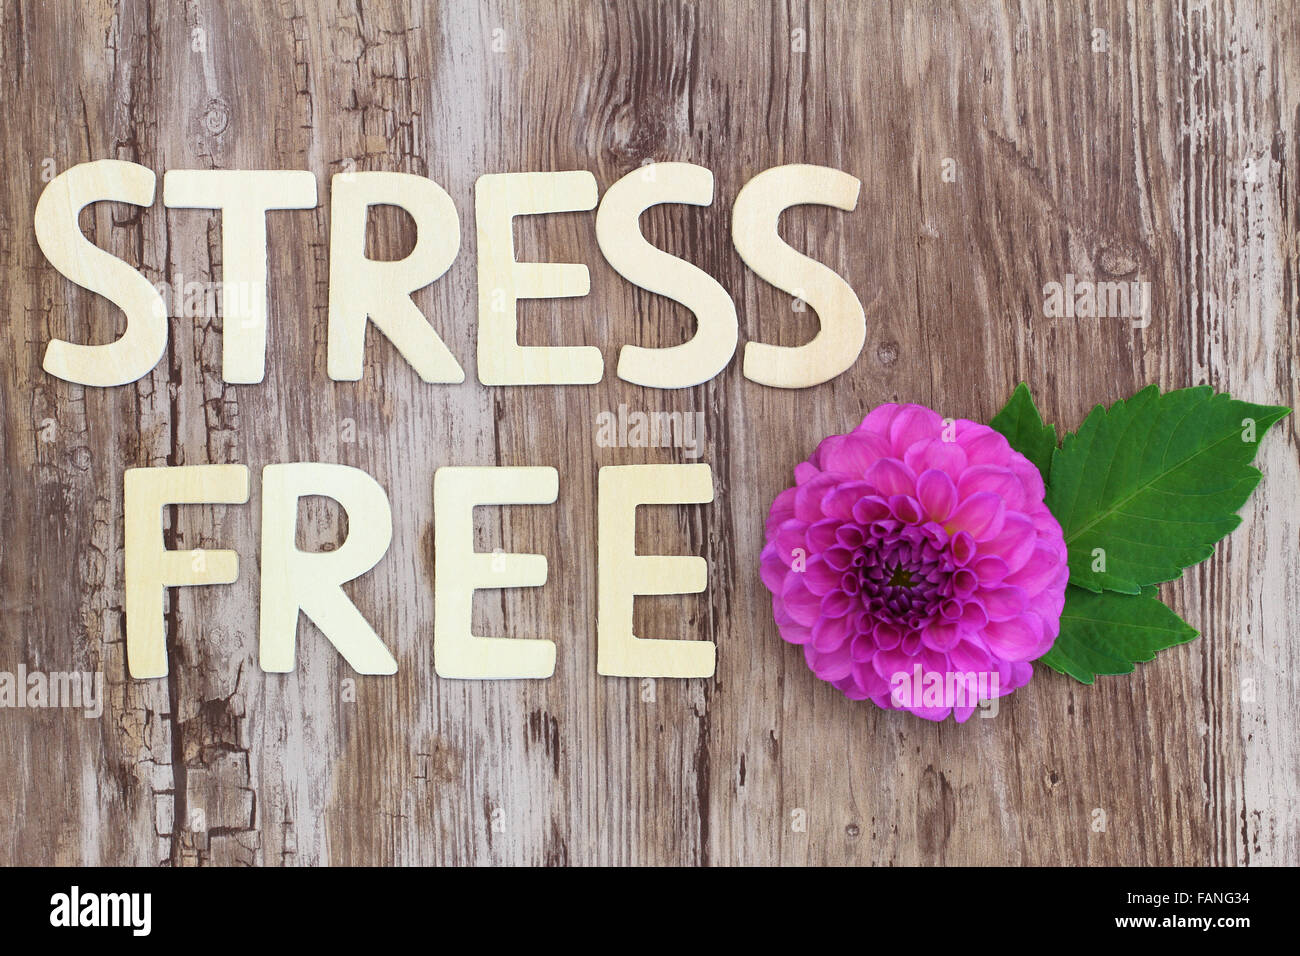 Stress free written with wooden letters and pink dahlia flower Stock Photo